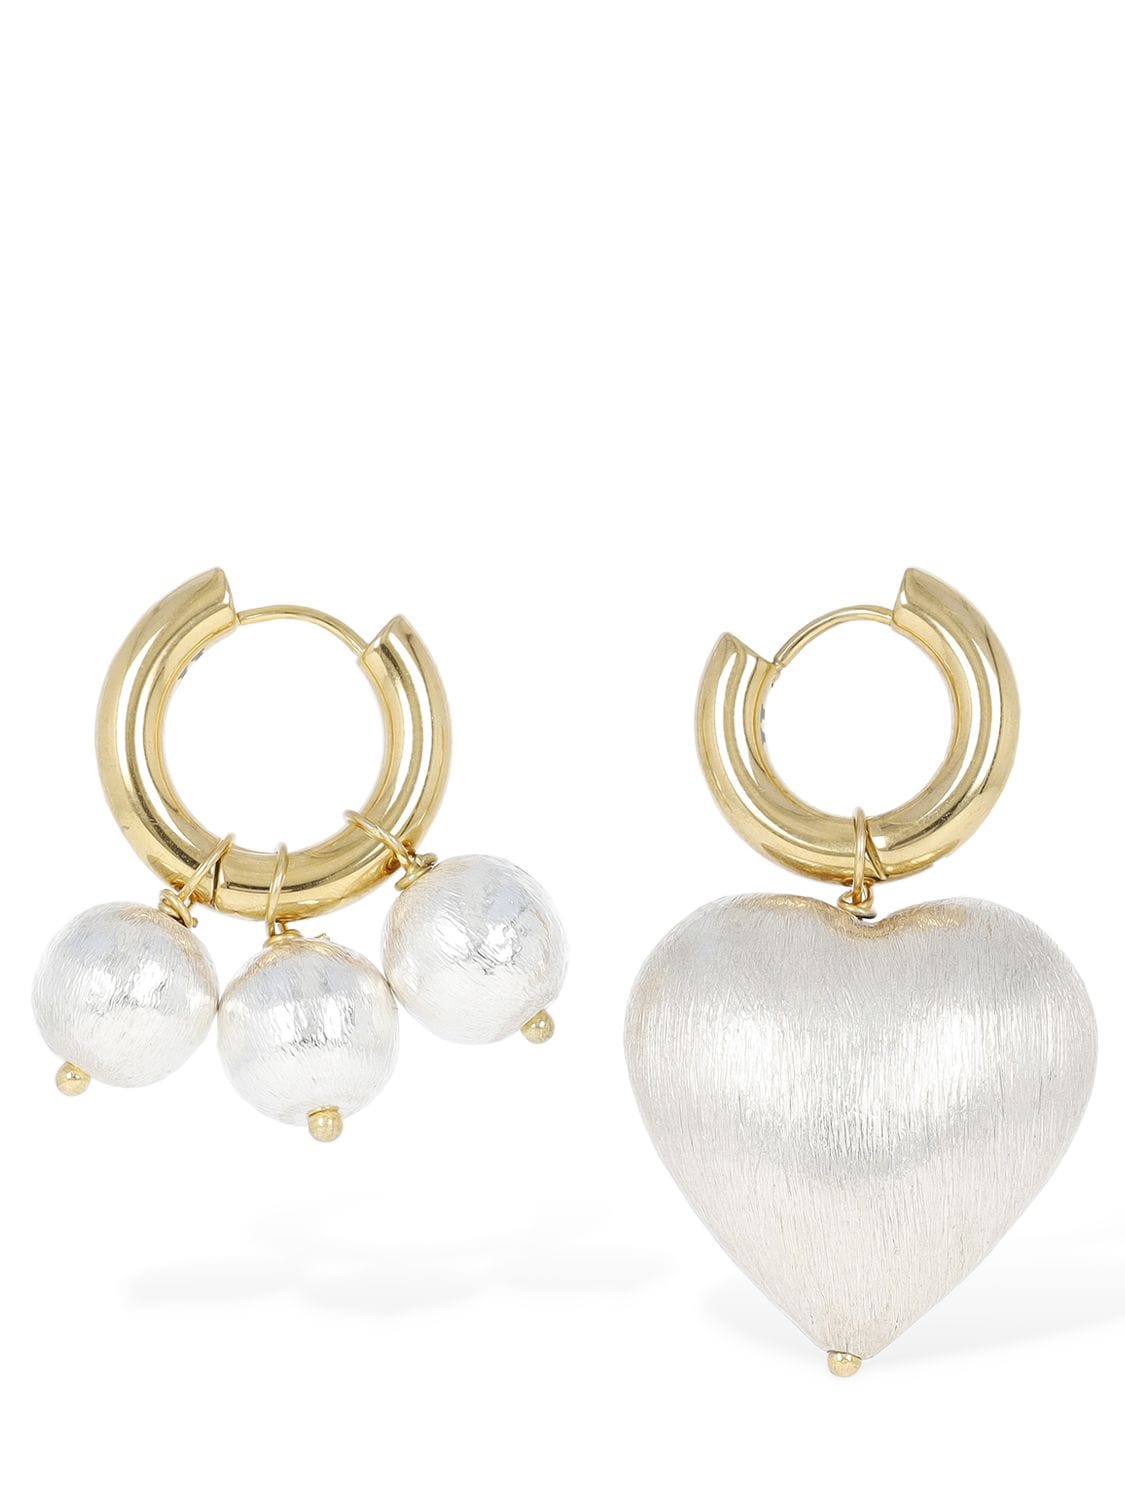 Image of Heart & Beads Mismatched Earrings